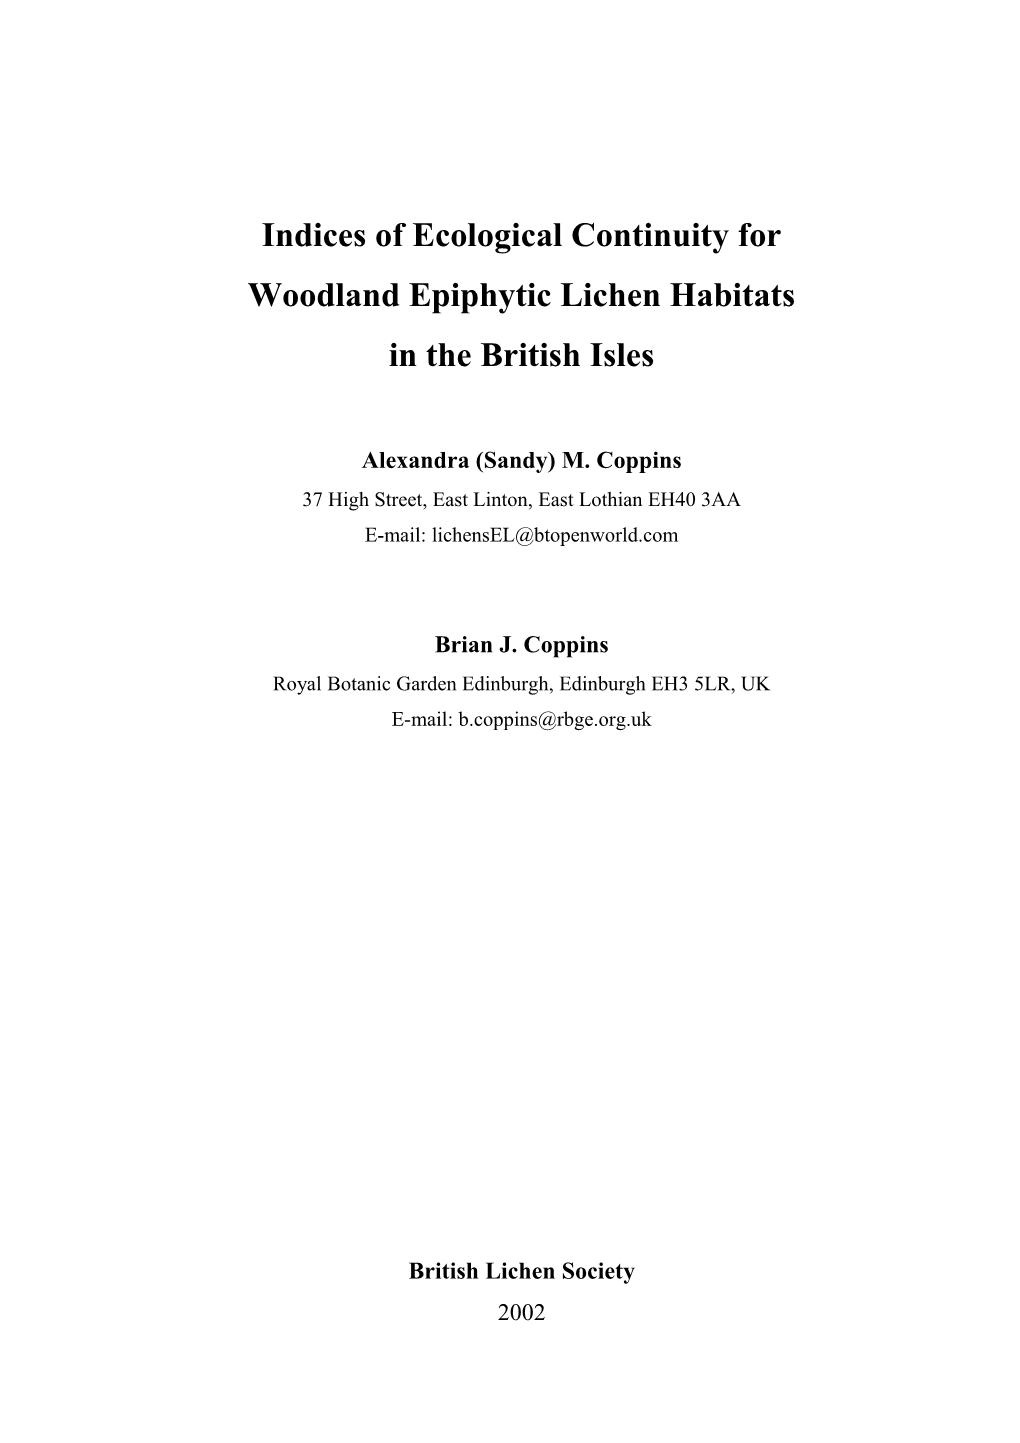 Indices of Ecological Continuity for Woodland Epiphytic Lichen Habitats in the British Isles